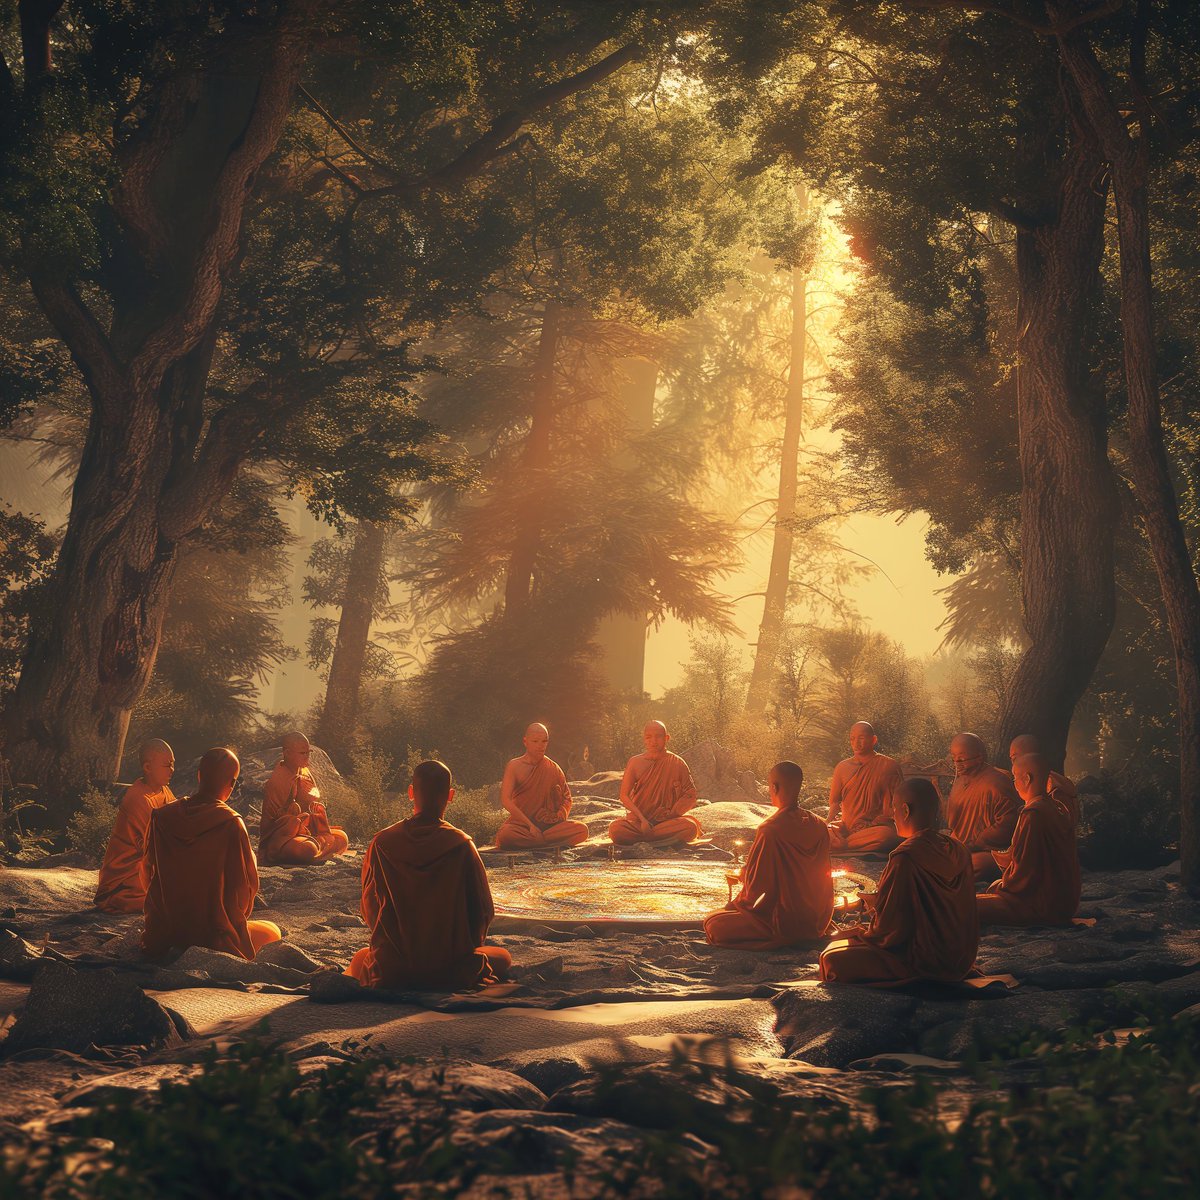 The Power of Words: Exploring Dharanis and Mantras in Buddhism 

The terms 'dharani' and 'mantra' often come up in discussions about meditation and spiritual practices. Though they are related, each serves a distinct purpose. Let's explore...

A dharani is essentially a long